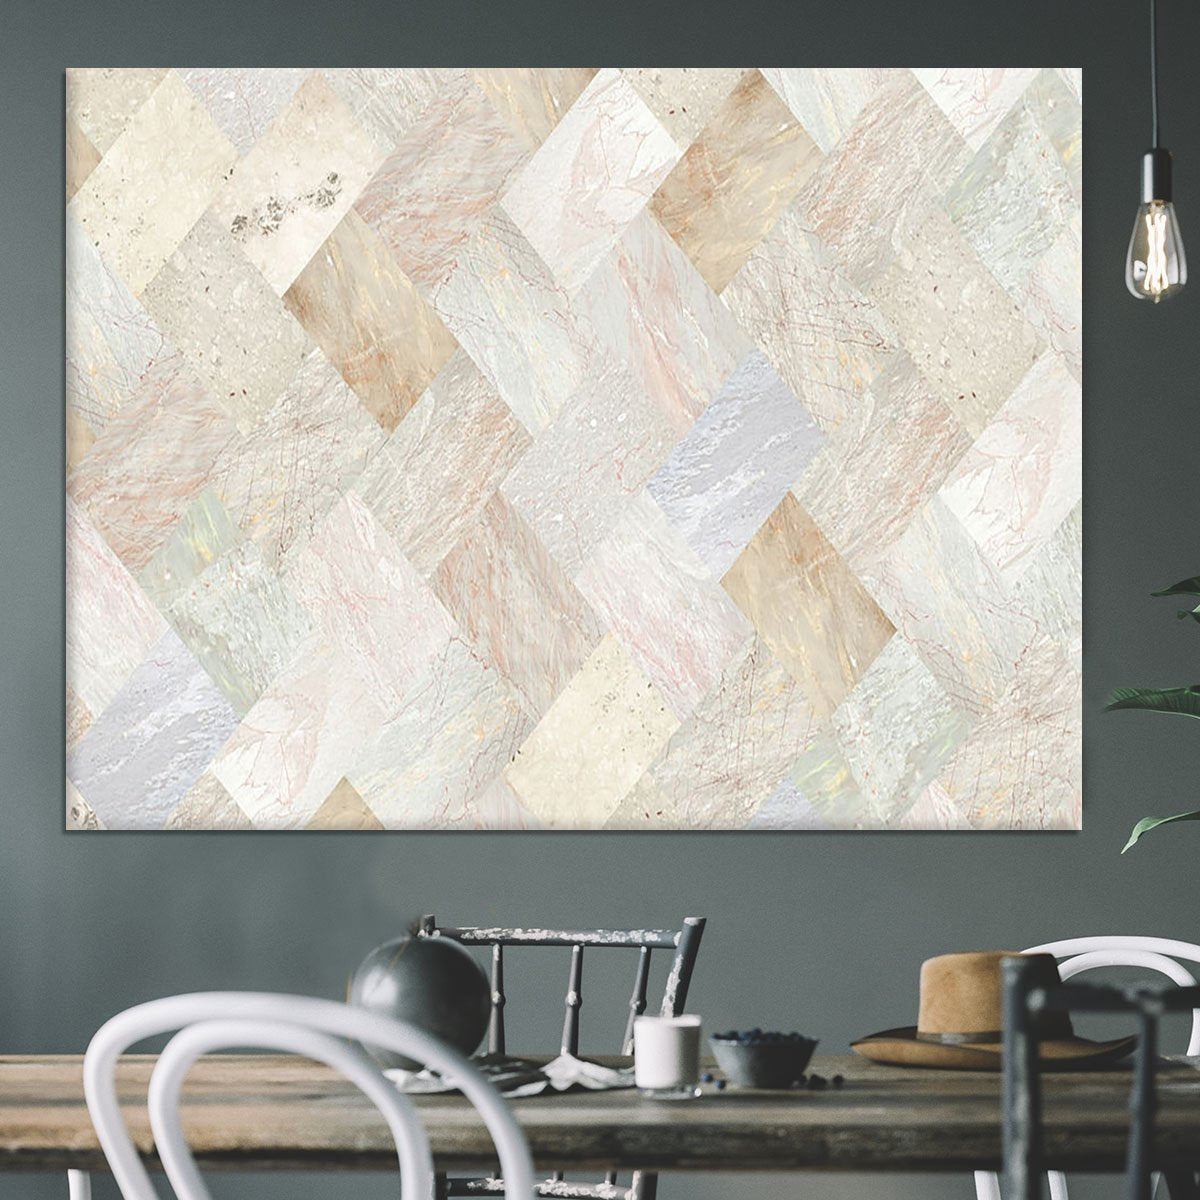 Netural Patterned Marble Canvas Print or Poster